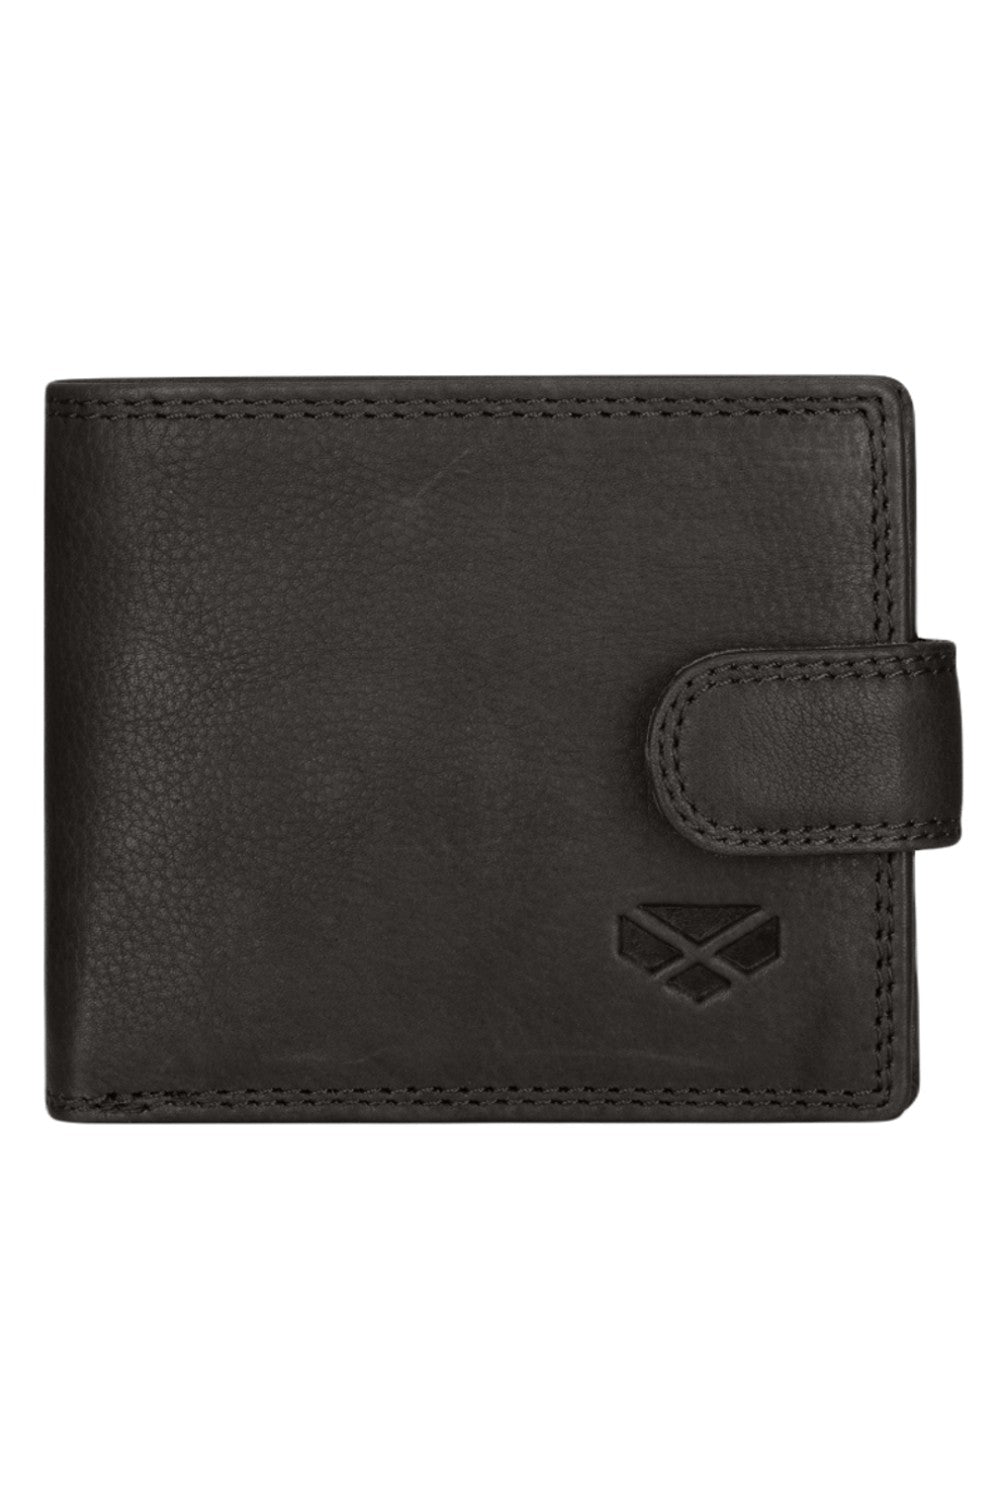 Hoggs of Fife Monarch Leather Coin Wallet with Tab in Black 